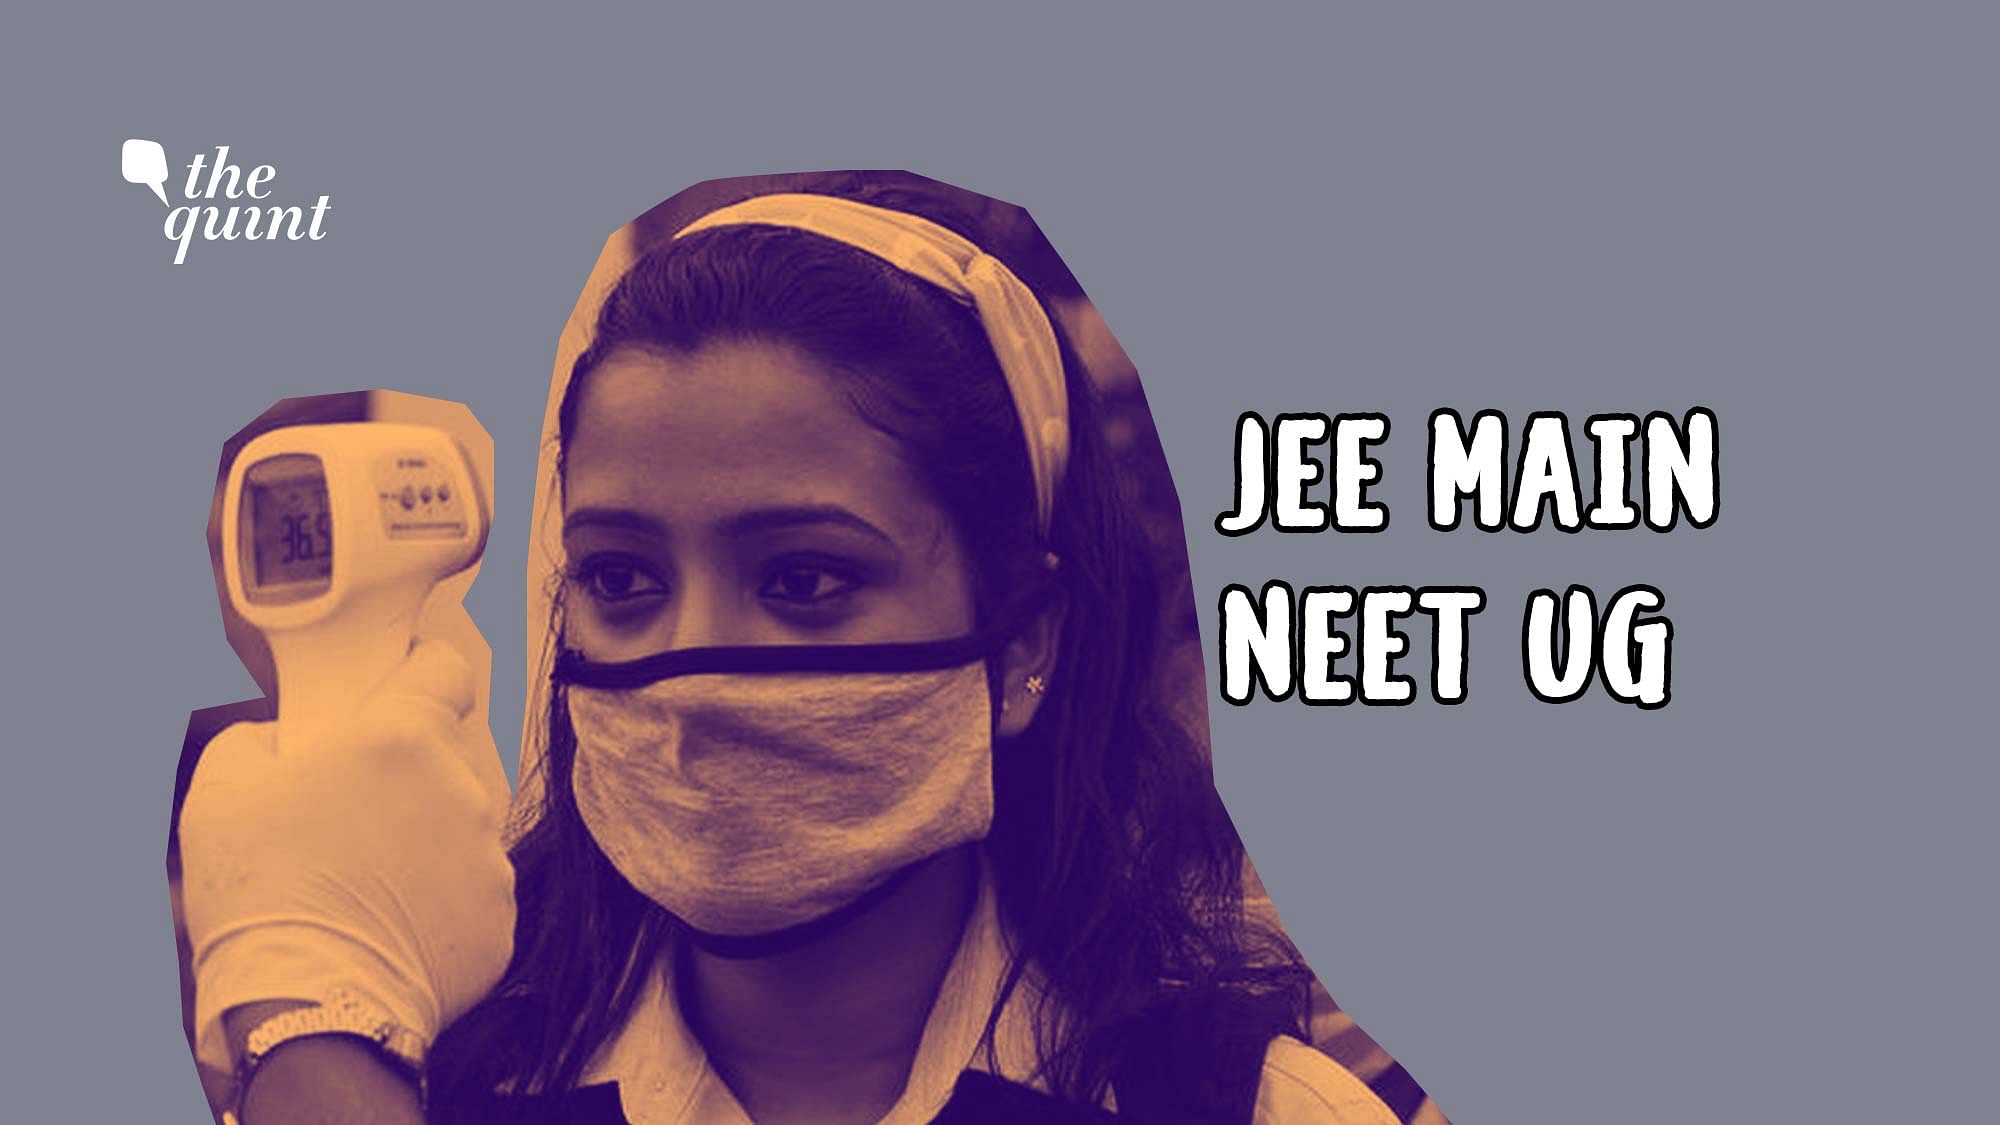 JEE Main is scheduled from 1 to 6 September, while NEET UG will be conducted on 13 September.&nbsp;